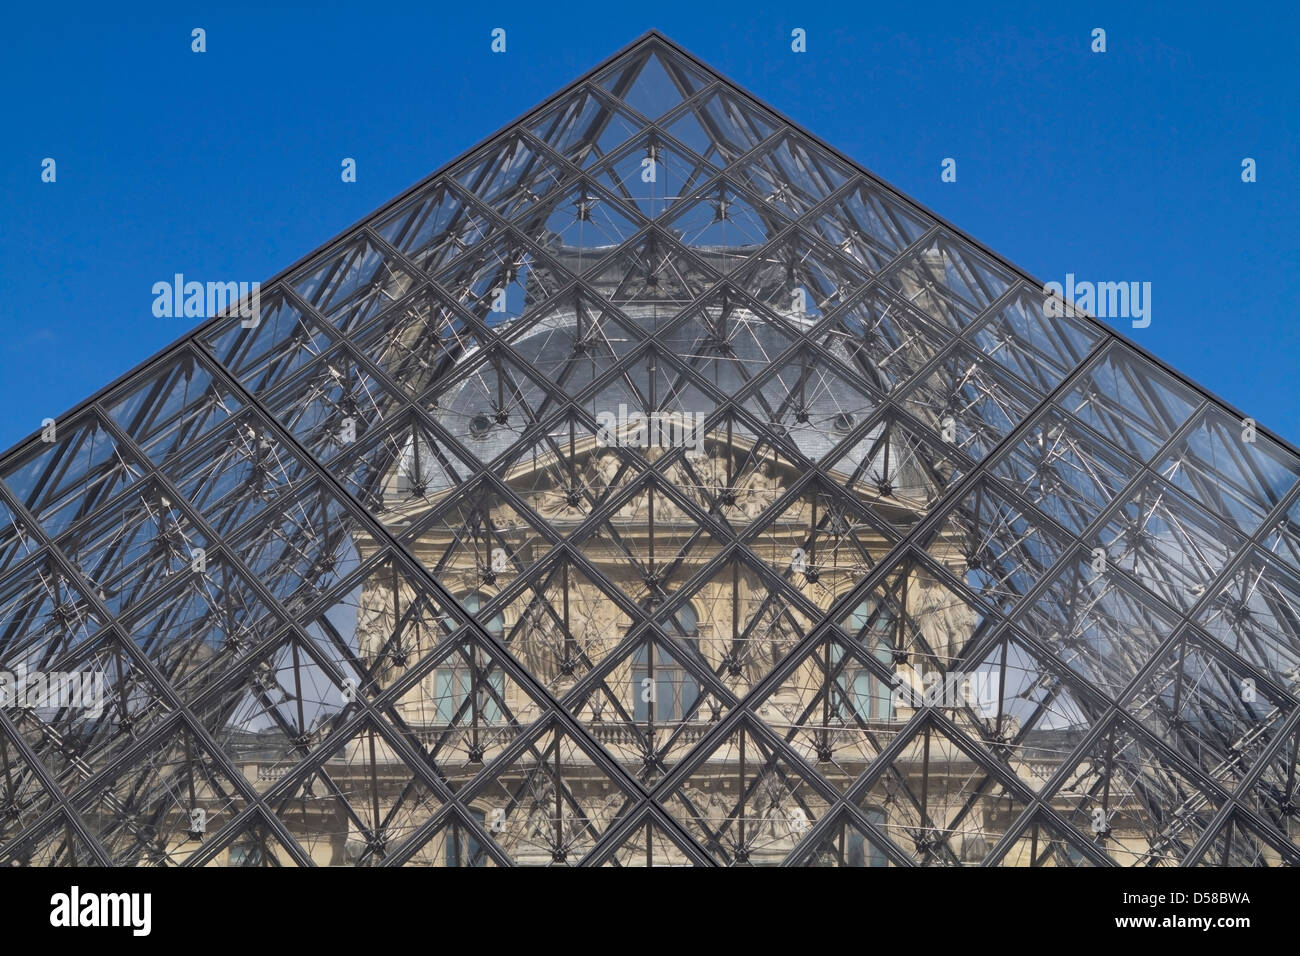 The Louvre museum seen through the glass pyramid in Paris, France Stock Photo